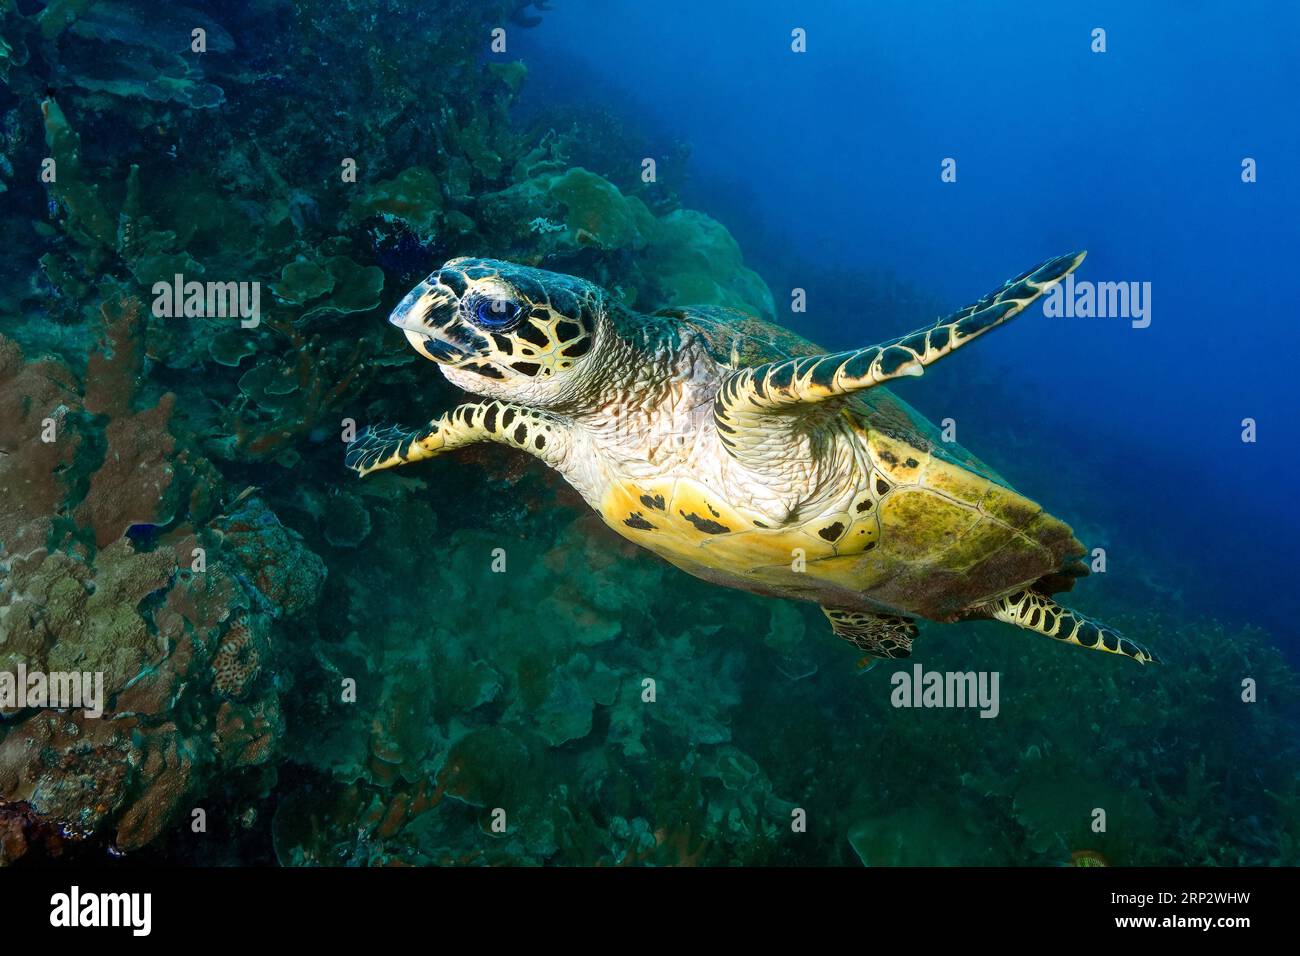 Hawksbill turtle (Eretmochelys imbrikata) swimming in front of coral reef with stony corals (Scleractinia), Pacific Ocean, Caroline Islands Stock Photo